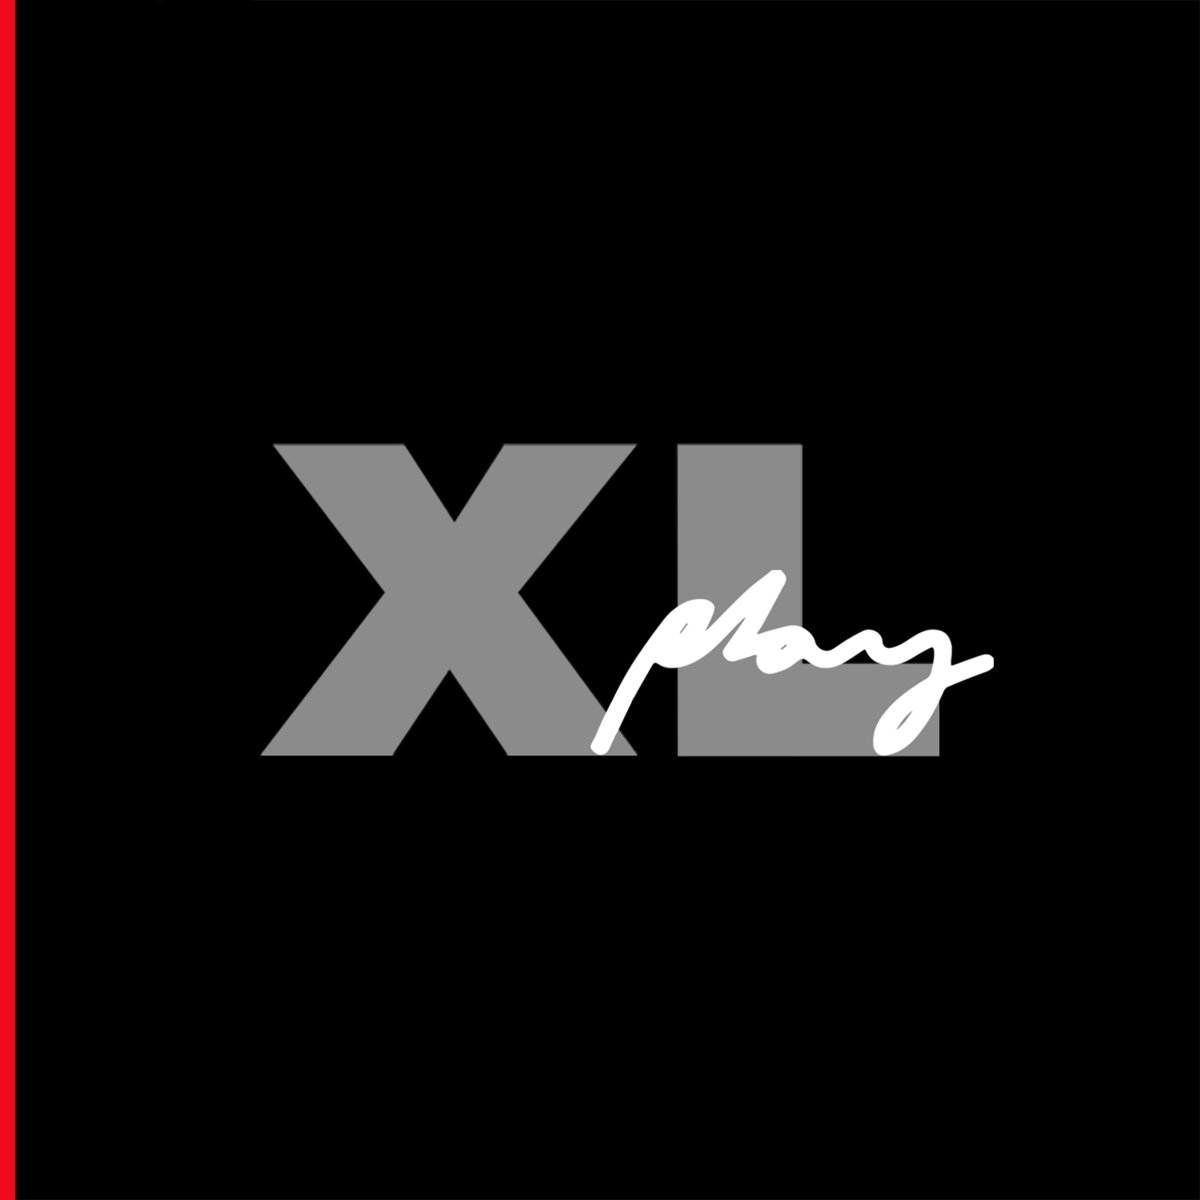 🚨 Fresh update on XL Play. Featuring new music from @MakayaMcCraven, @IbeyiOfficial, Joy Orbison, Overmono (@TesselaMusic + @Truss_101) & more 🌕 Listen here: xl.ffm.to/playlist